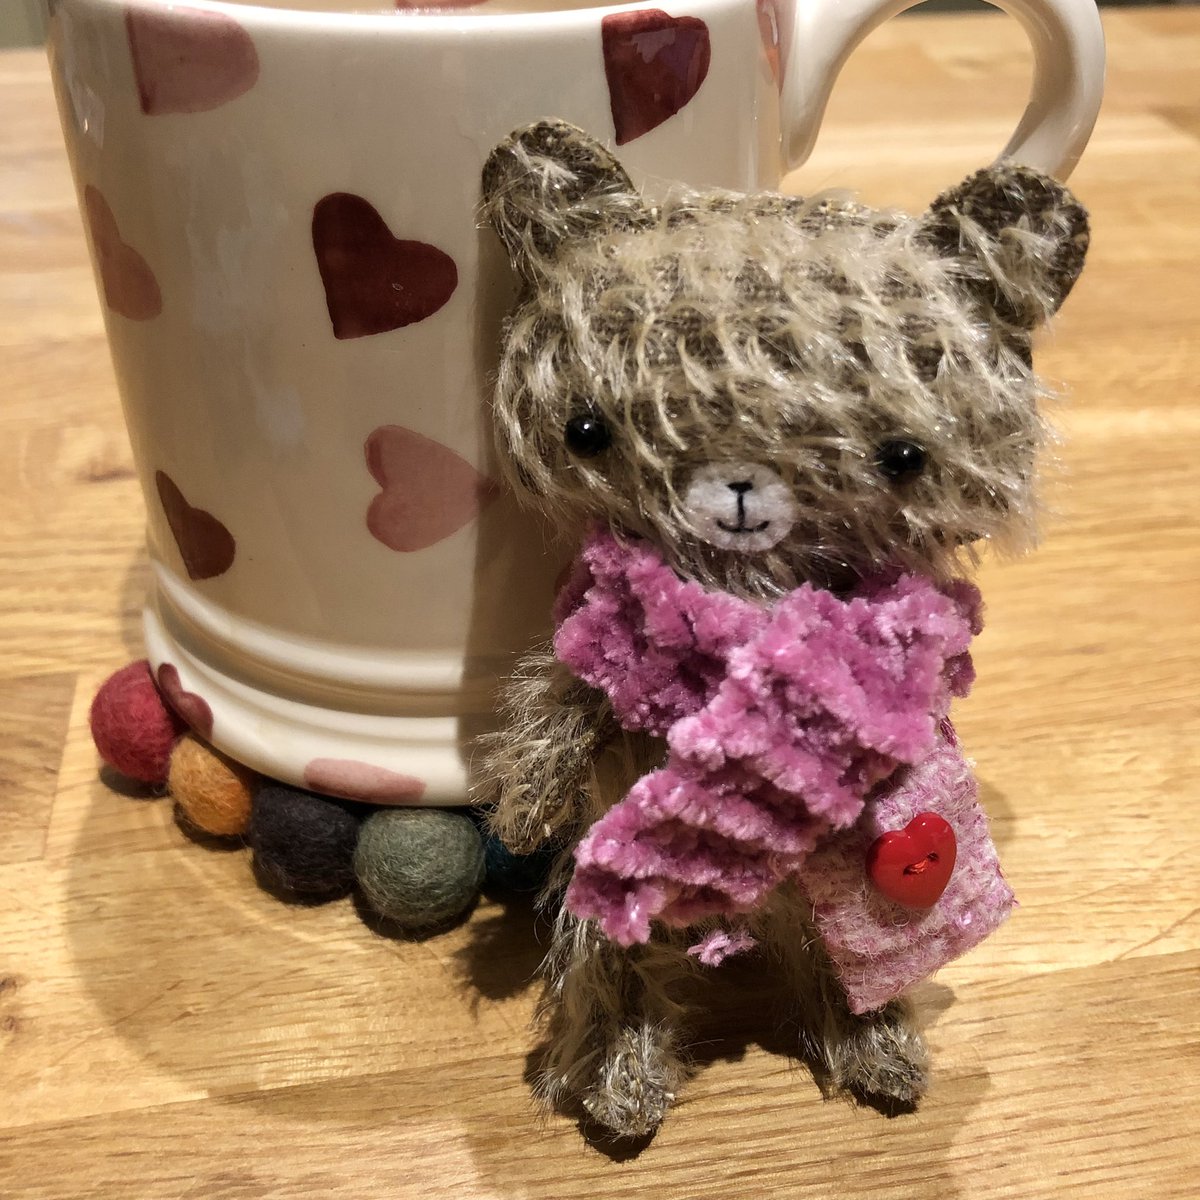 Mondays bear is all set for the cooler weather with her pink hand knitted chenille scarf.
She carrying a cute pink Harris Tweed bag decorated with a red heart button to keep all her essentials in. 
#bears #CollectibleBears #handsewn #unique #bear #mohairbear #collectorsbear